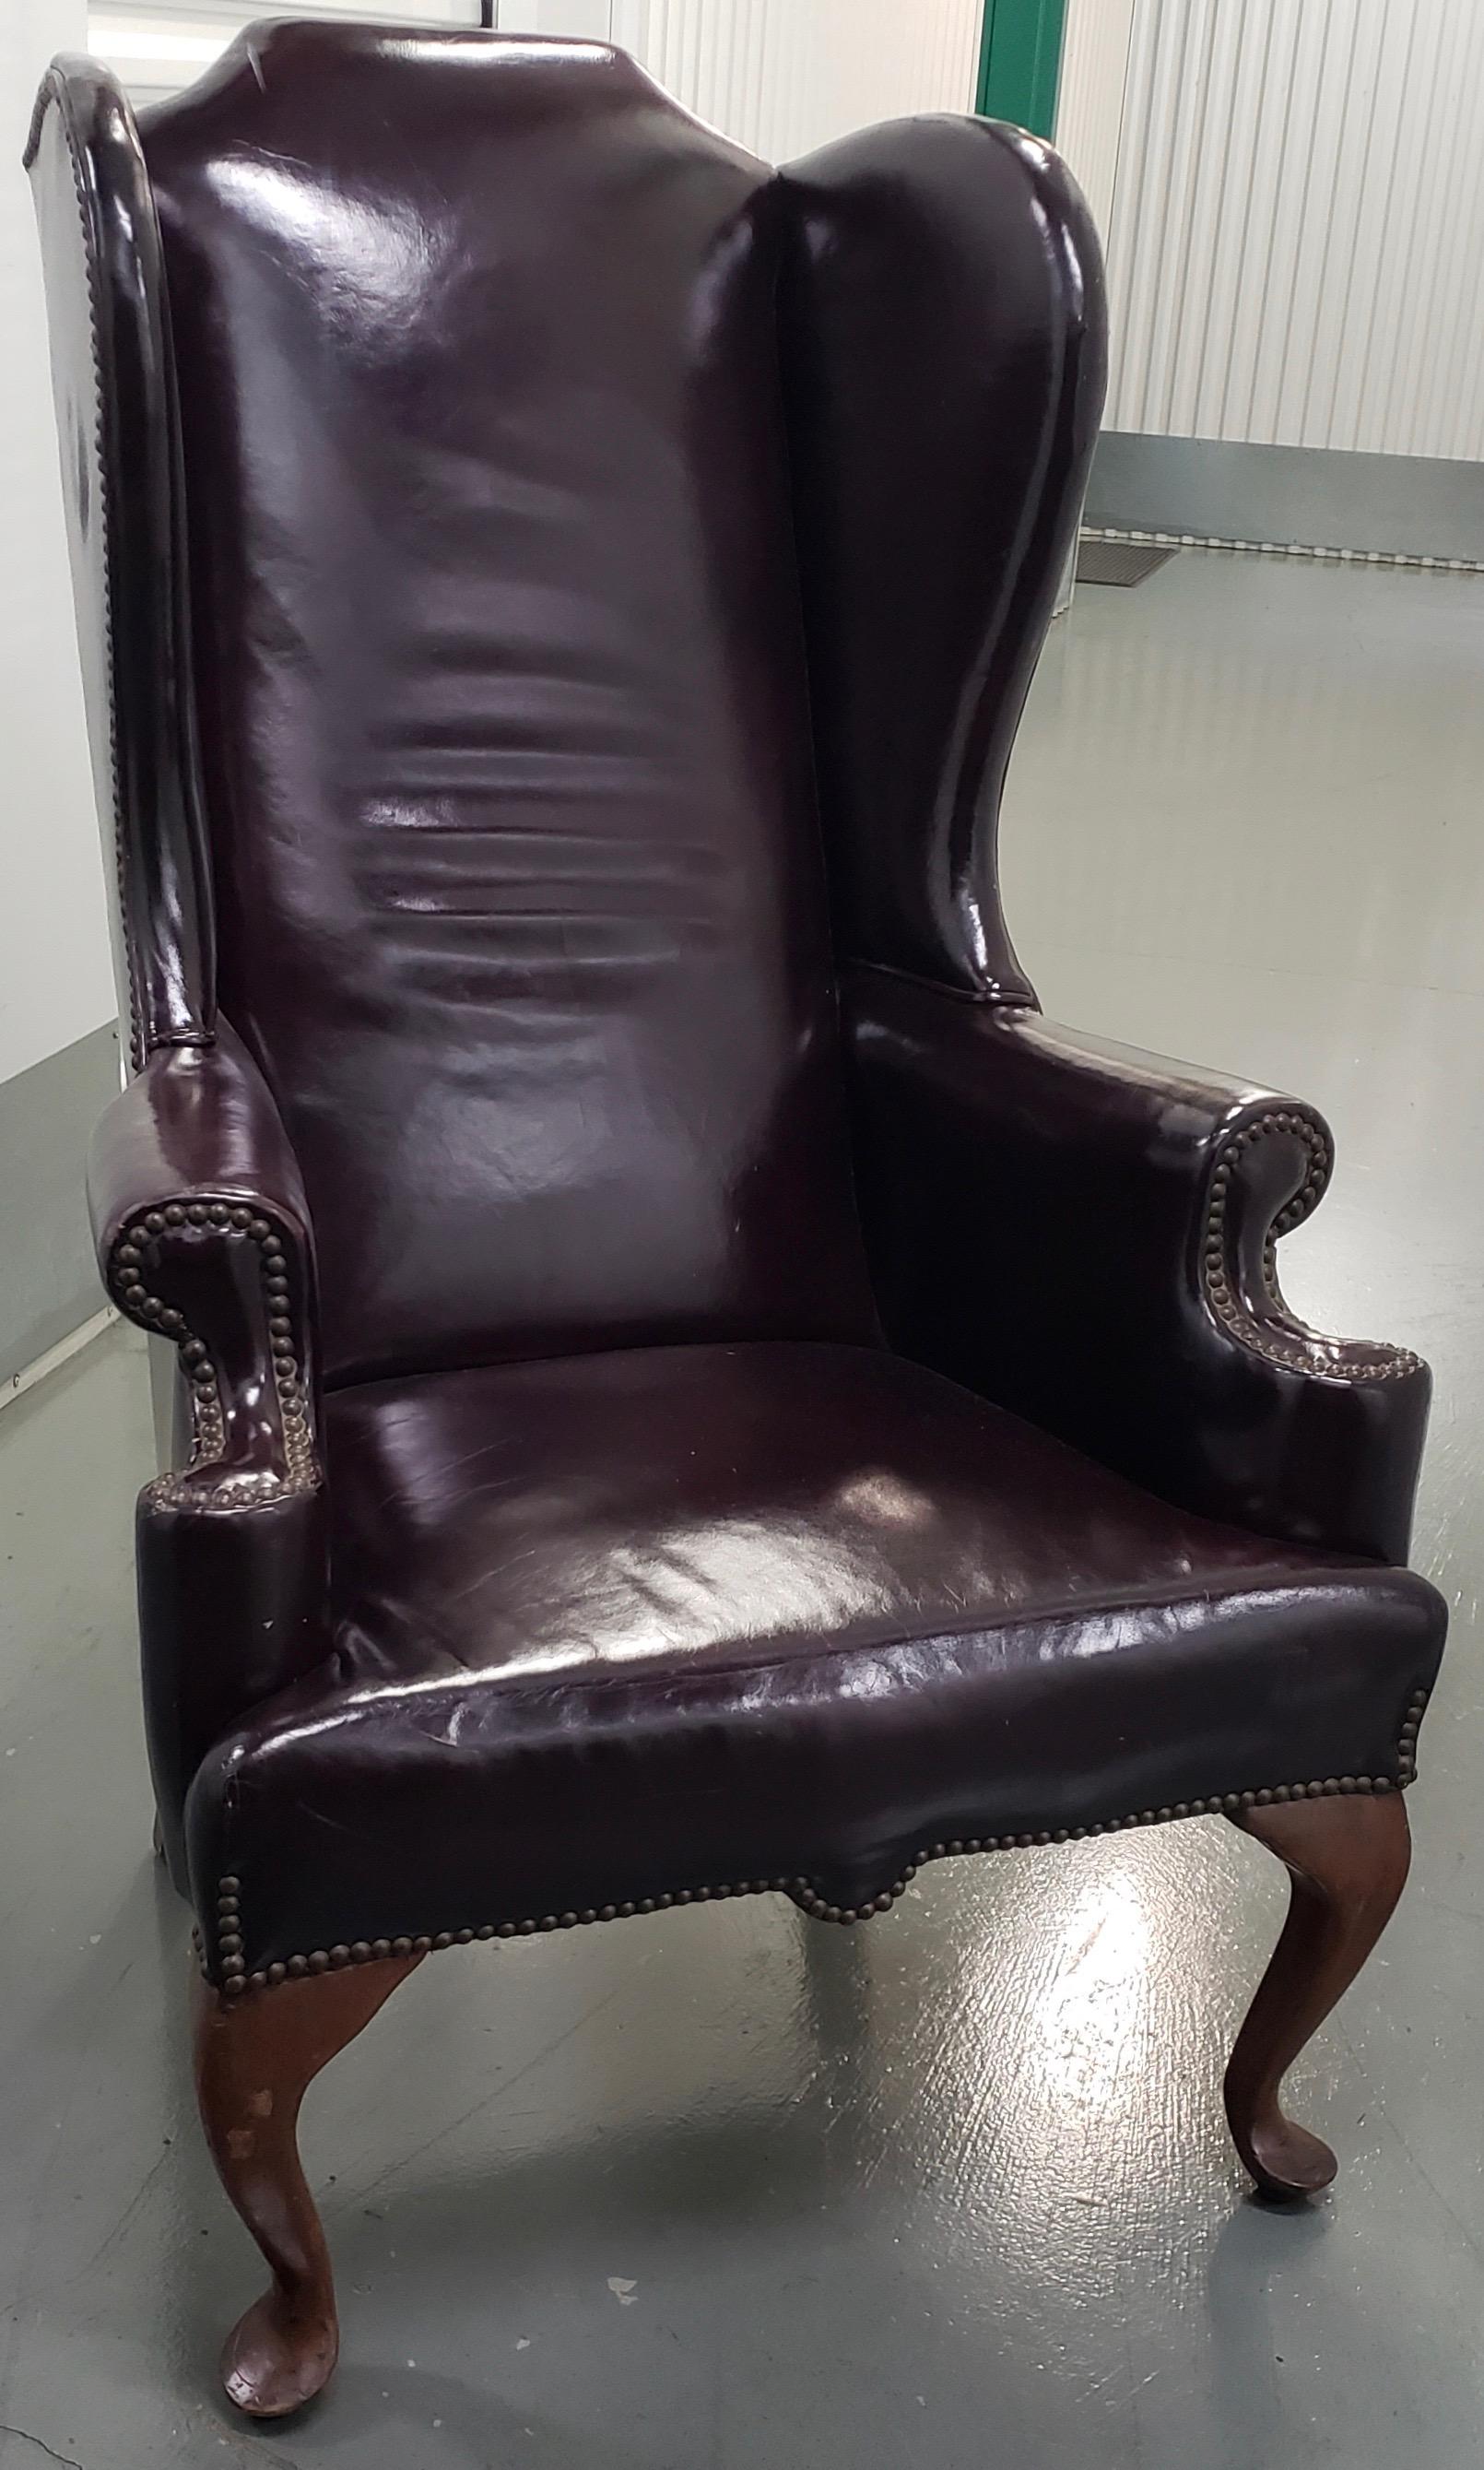 Rich burgundy patent leather wing back chair, circa 1920

Absolutely beautiful 1920s wingback chair made with rich burgundy patent leather over a solid mahogany frame. The leather is supported by brass tacks that have a rich patina that can only